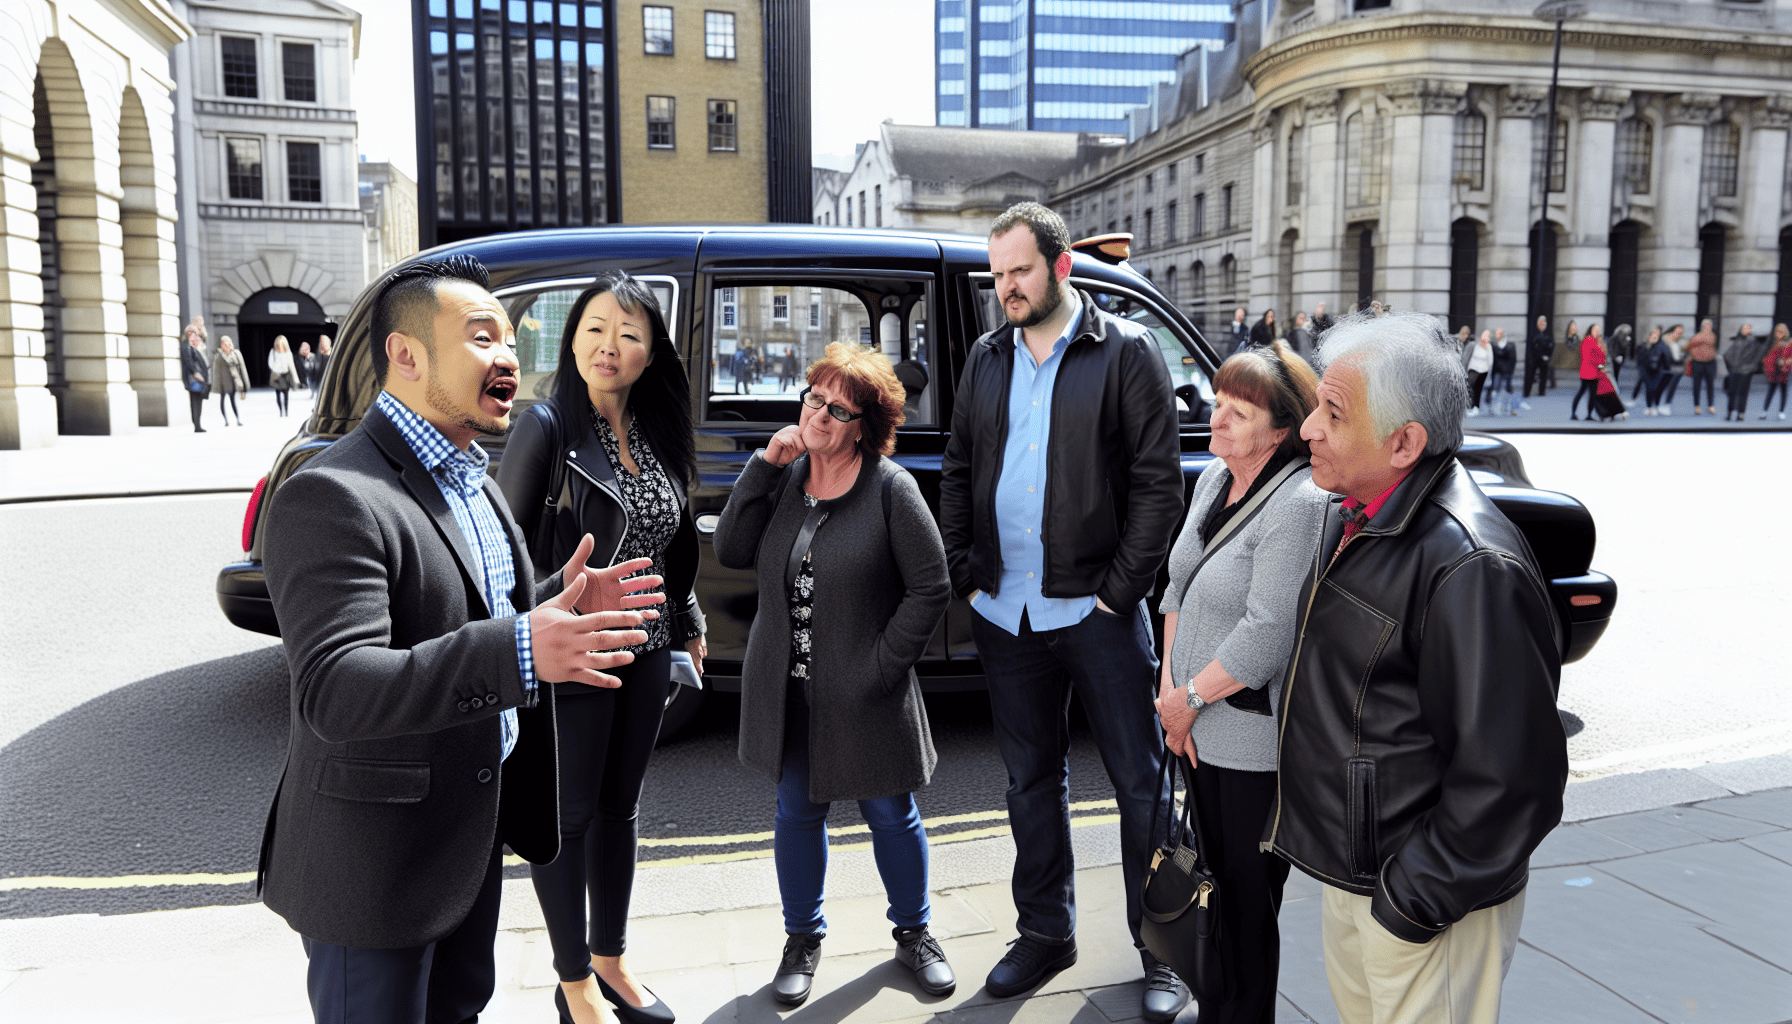 A knowledgeable tour guide sharing insights with visitors during a black cab tour